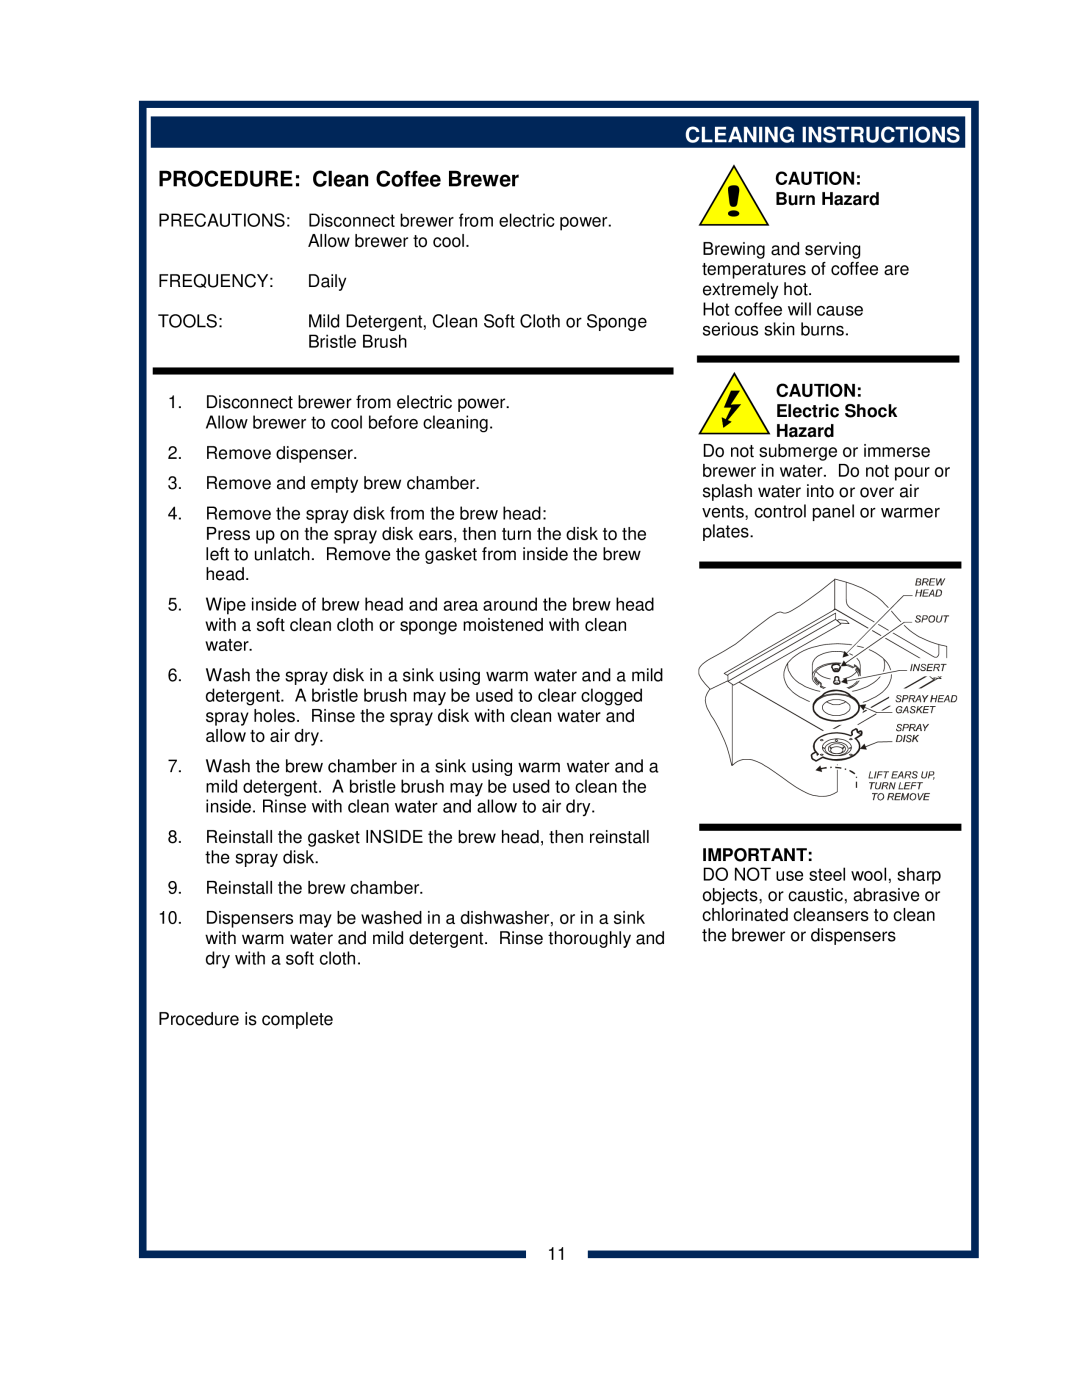 Bloomfield 2030 owner manual PROCEDURE Clean Coffee Brewer, Cleaning Instructions 